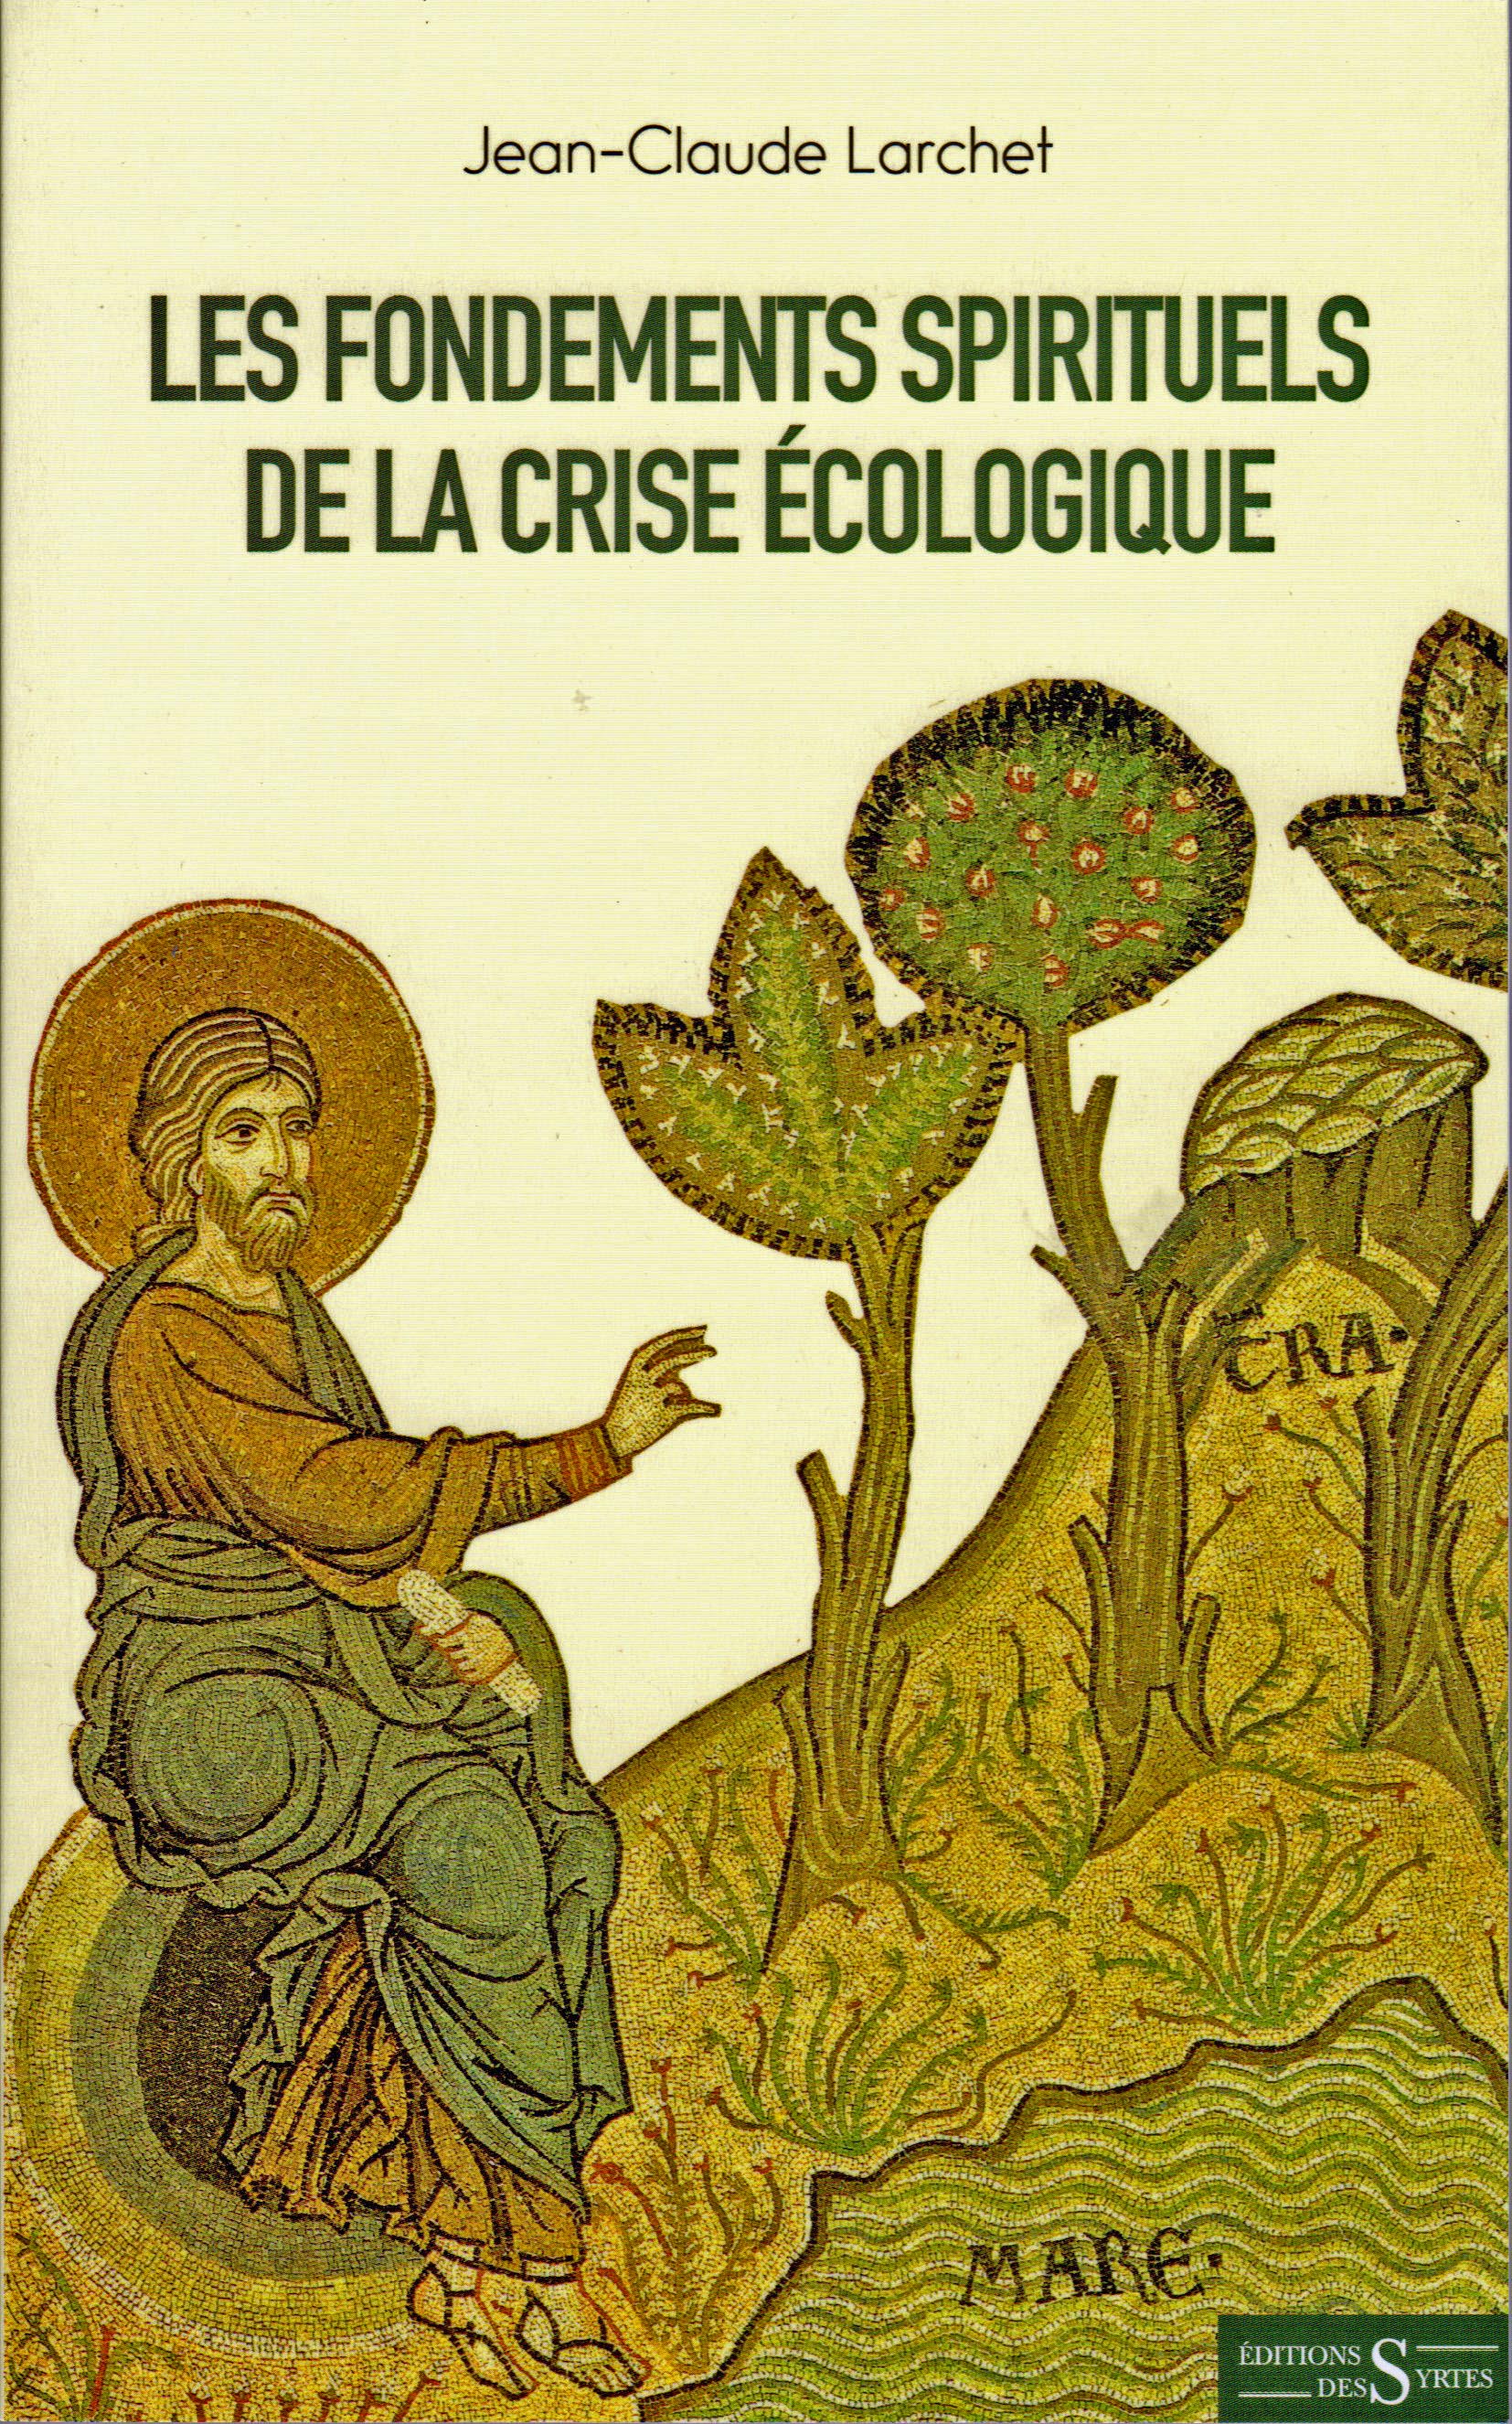 The spiritual foundations of the ecological crisis: a new book by jean-claude larchet